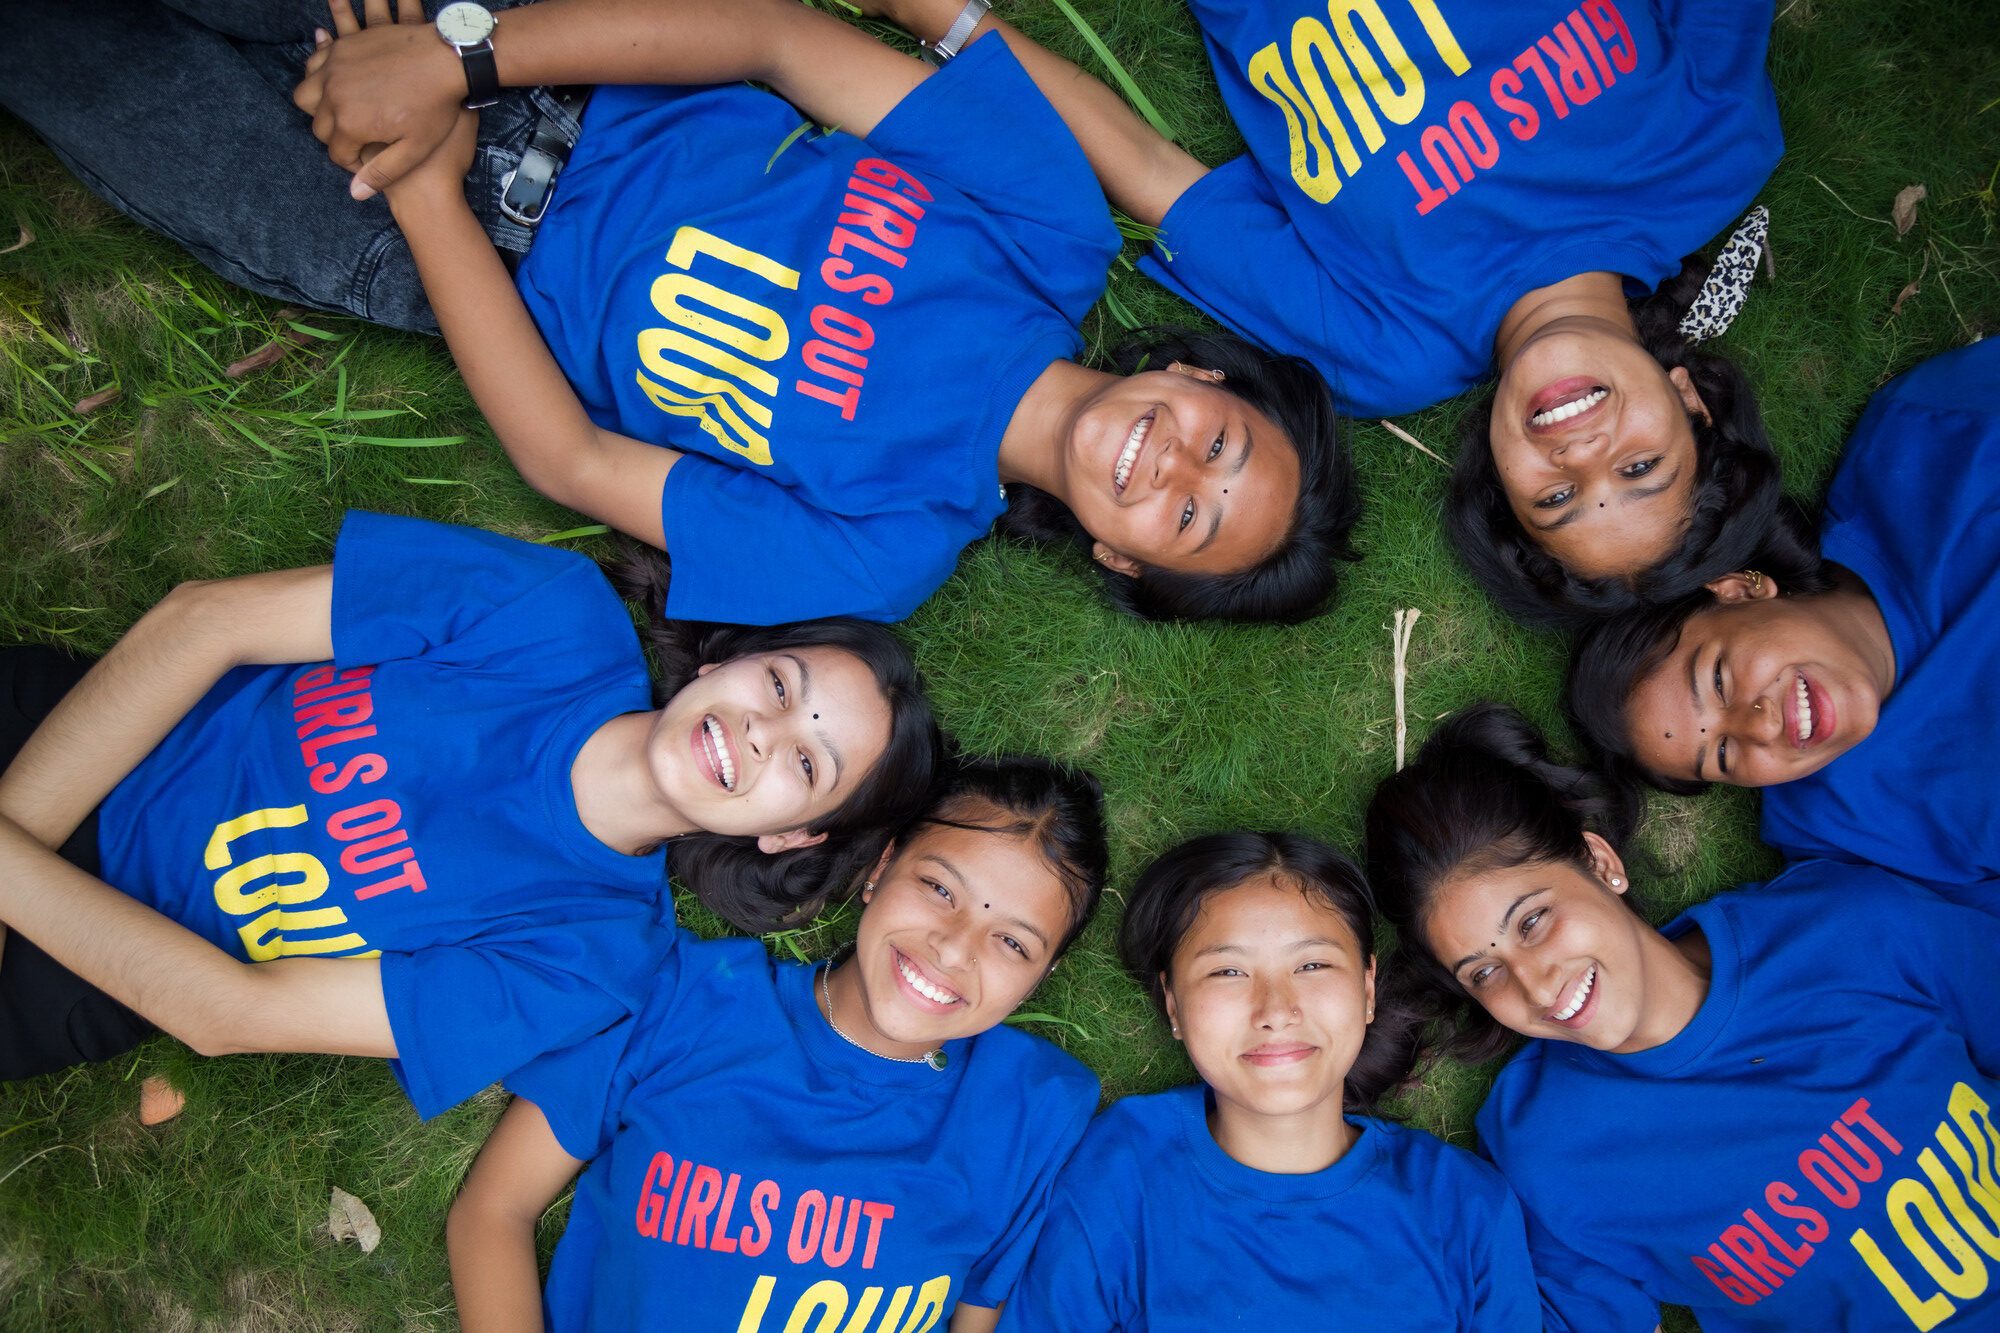 Members of the Girls Out Loud group in Nepal lay on the grass in a circle, smiling.